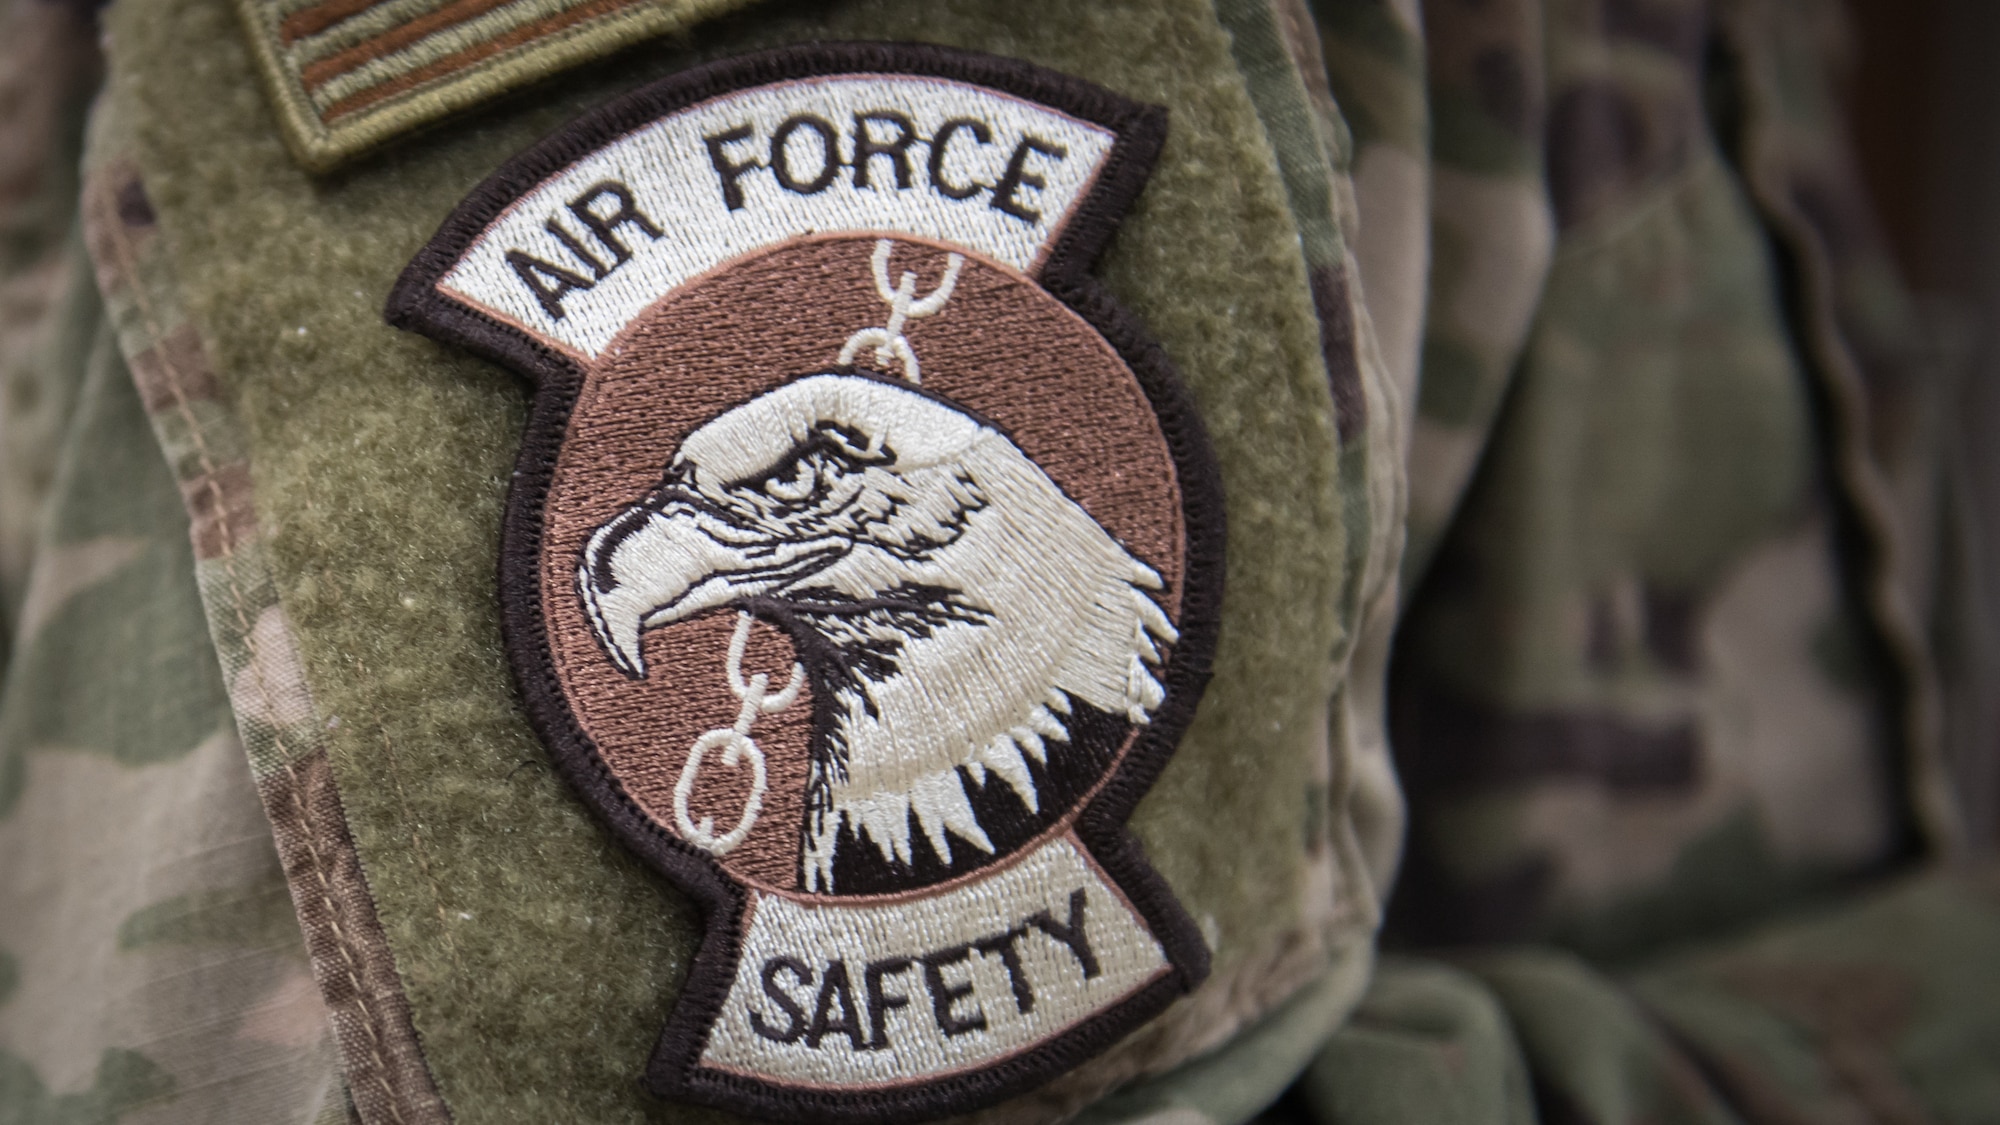 U.S. Air Force Staff Sgt. Courtney Muhl, 386th Air Expeditionary Wing occupational safety NCO-in-charge, dons the Air Force Safety patch at Ali Al Salem Air Base, Kuwait, Nov. 27, 2019. Muhl conducted an annual safety inspection of the clinic ensuring it complied with safety requirements, standards and programs. (U.S. Air Force photo by Tech. Sgt. Daniel Martinez)